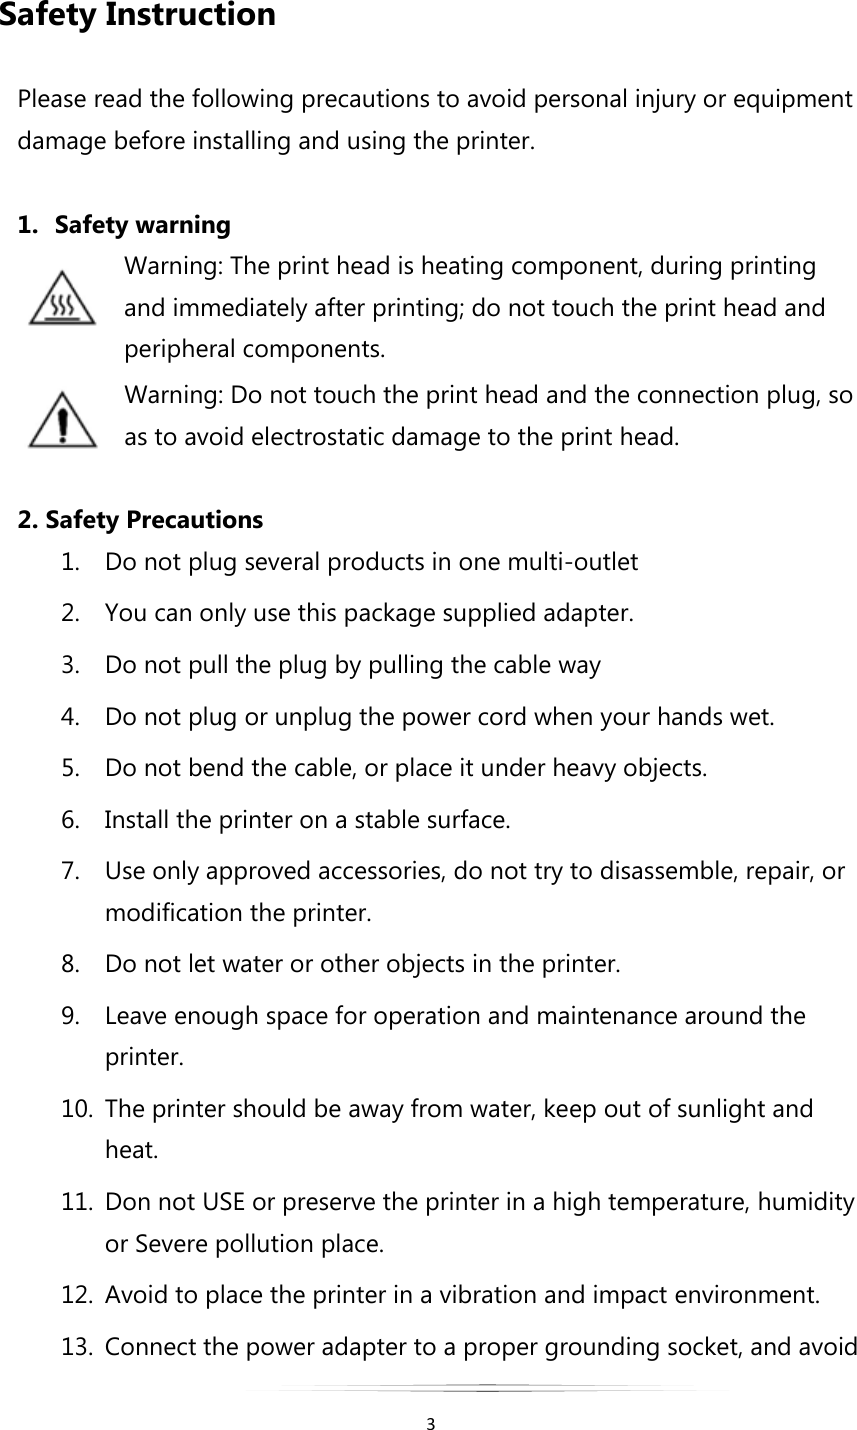   3  Safety Instruction  Please read the following precautions to avoid personal injury or equipment damage before installing and using the printer.  1. Safety warning Warning: The print head is heating component, during printing and immediately after printing; do not touch the print head and peripheral components. Warning: Do not touch the print head and the connection plug, so as to avoid electrostatic damage to the print head.  2. Safety Precautions 1. Do not plug several products in one multi-outlet 2. You can only use this package supplied adapter. 3. Do not pull the plug by pulling the cable way 4. Do not plug or unplug the power cord when your hands wet. 5. Do not bend the cable, or place it under heavy objects. 6. Install the printer on a stable surface. 7. Use only approved accessories, do not try to disassemble, repair, or modification the printer. 8. Do not let water or other objects in the printer. 9. Leave enough space for operation and maintenance around the printer. 10. The printer should be away from water, keep out of sunlight and heat. 11. Don not USE or preserve the printer in a high temperature, humidity or Severe pollution place. 12. Avoid to place the printer in a vibration and impact environment. 13. Connect the power adapter to a proper grounding socket, and avoid 